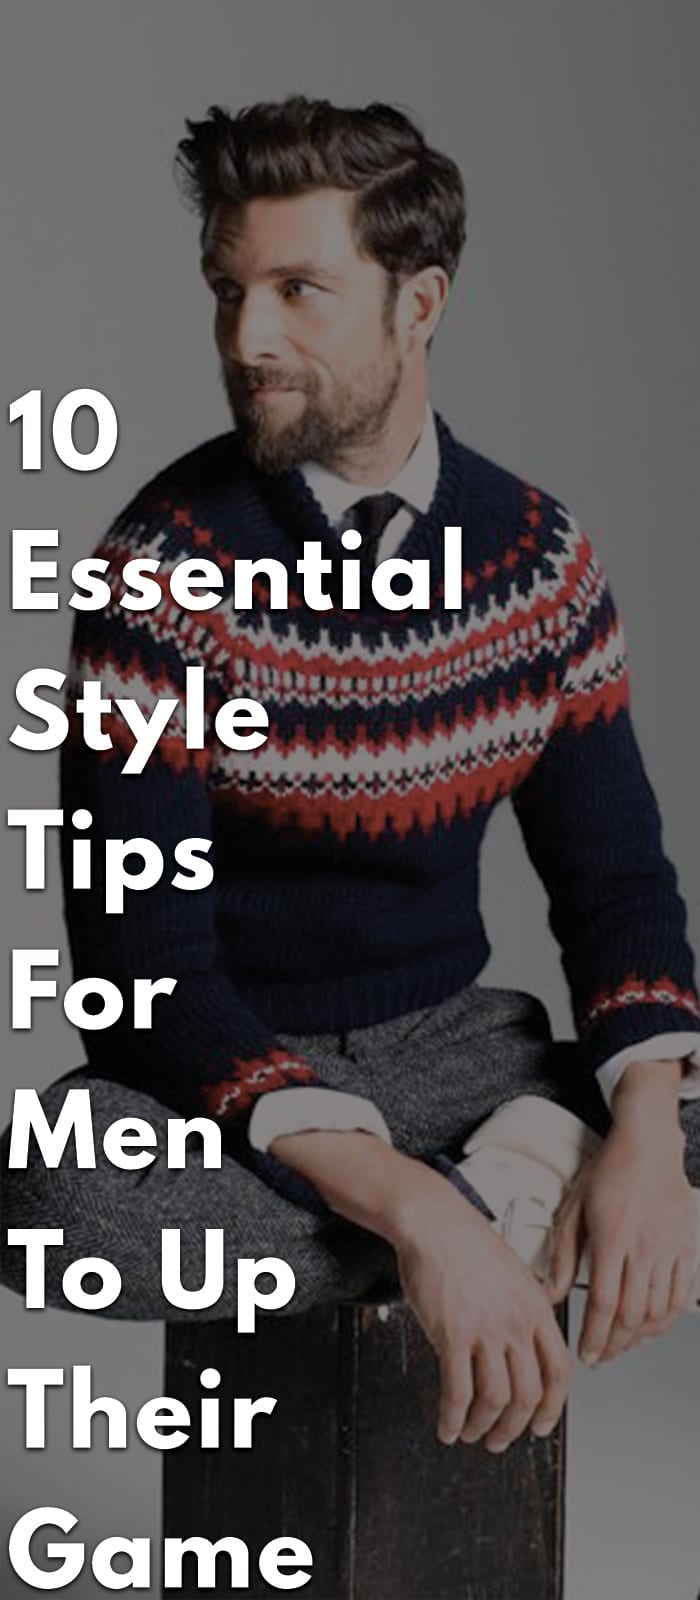 10-Essential-Style-Tips-for-Men-to-Up-Their-Game